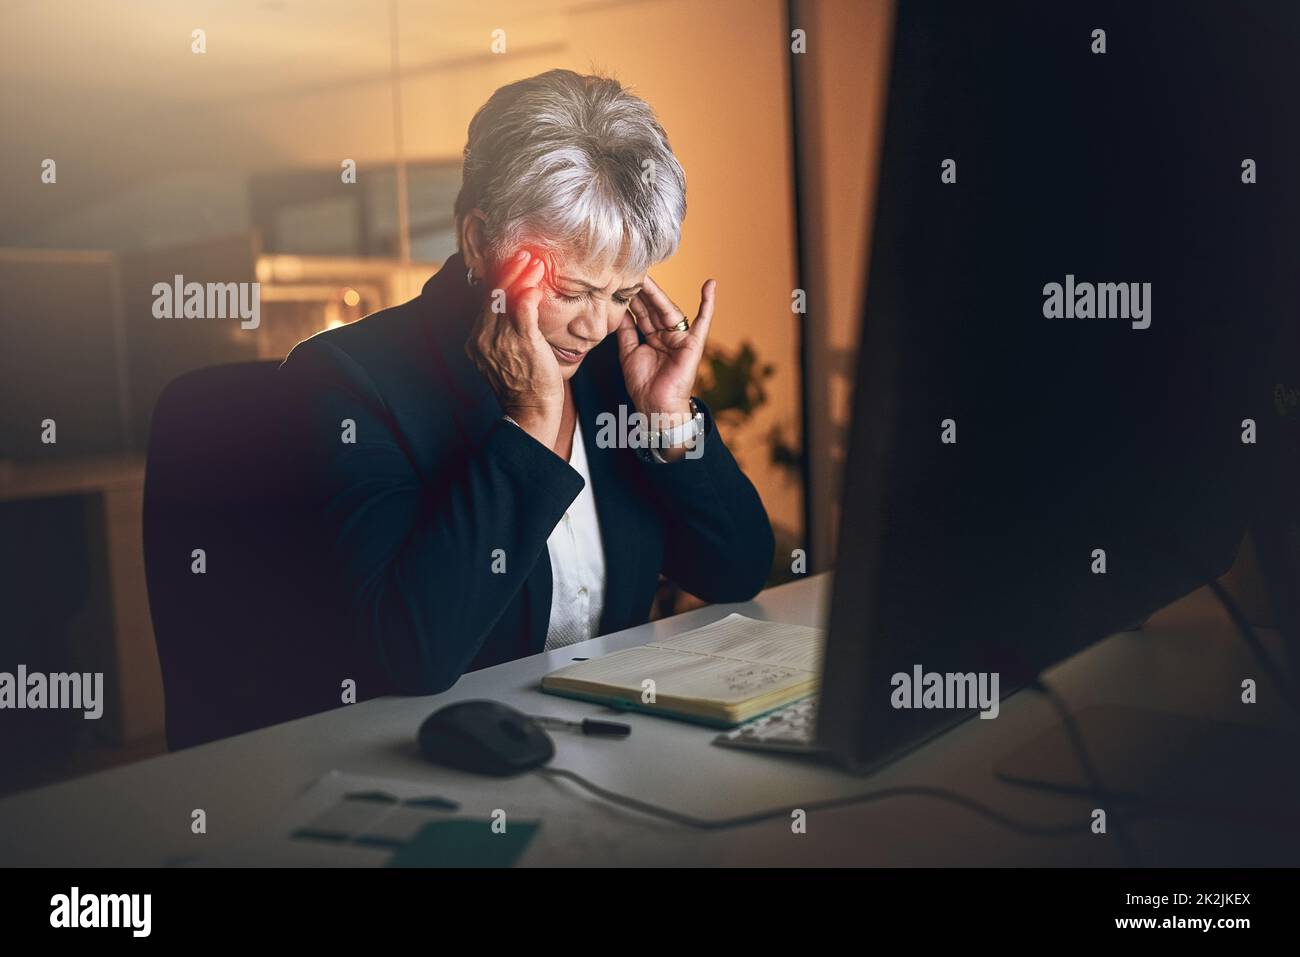 When stress invades the work space. Shot of a mature businesswoman experiencing a headache during a late night at work. Stock Photo